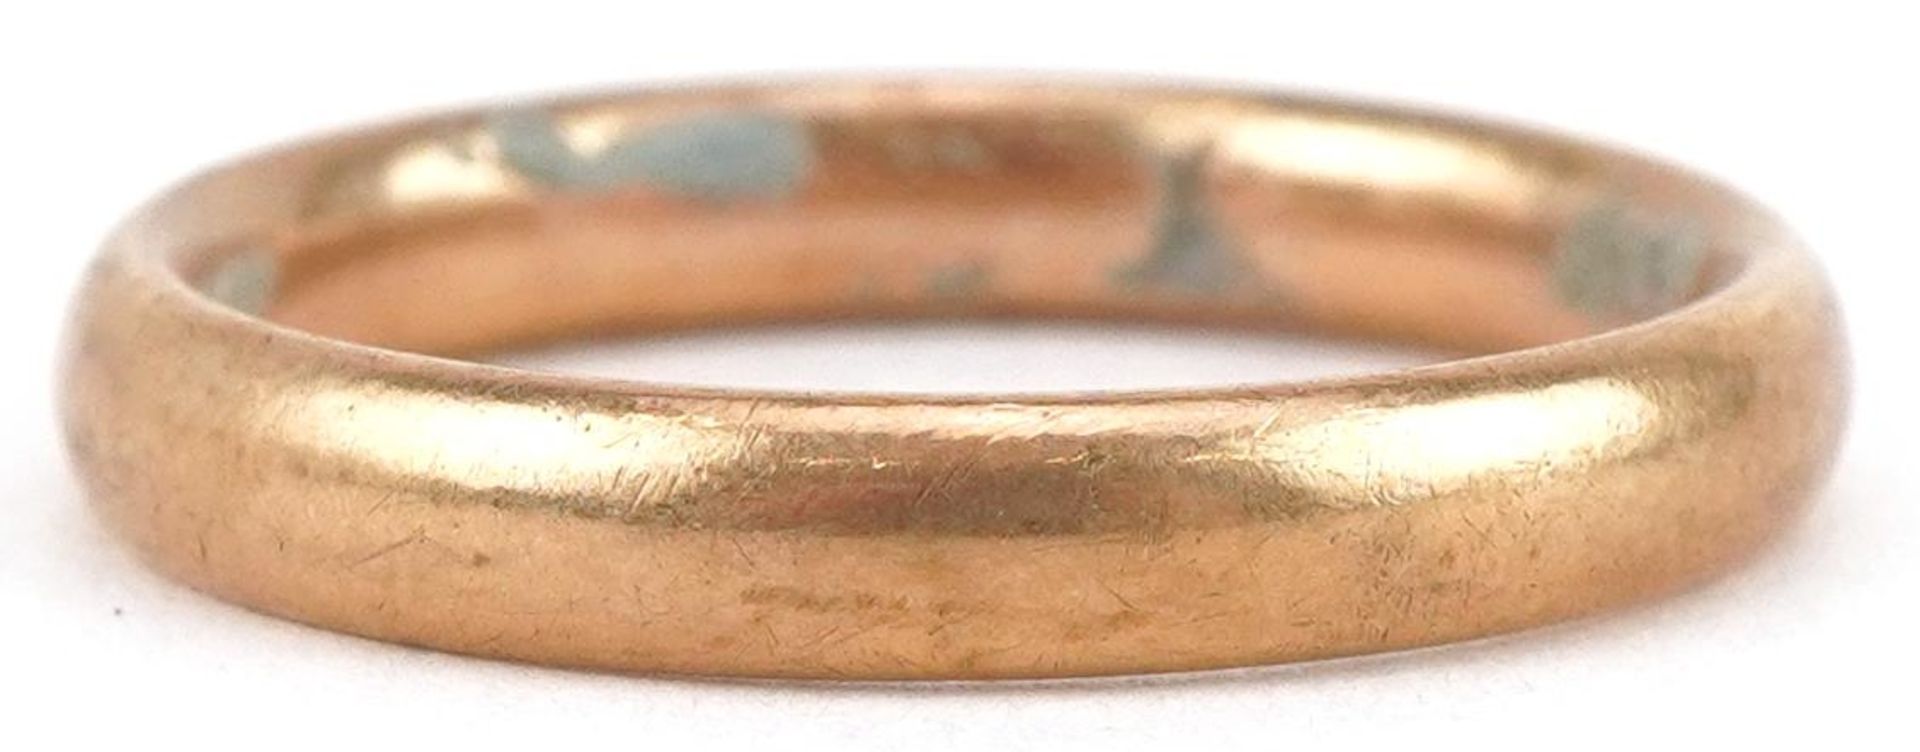 9ct gold wedding band, size M/N, 2.9g : For further information on this lot please visit www. - Bild 2 aus 4